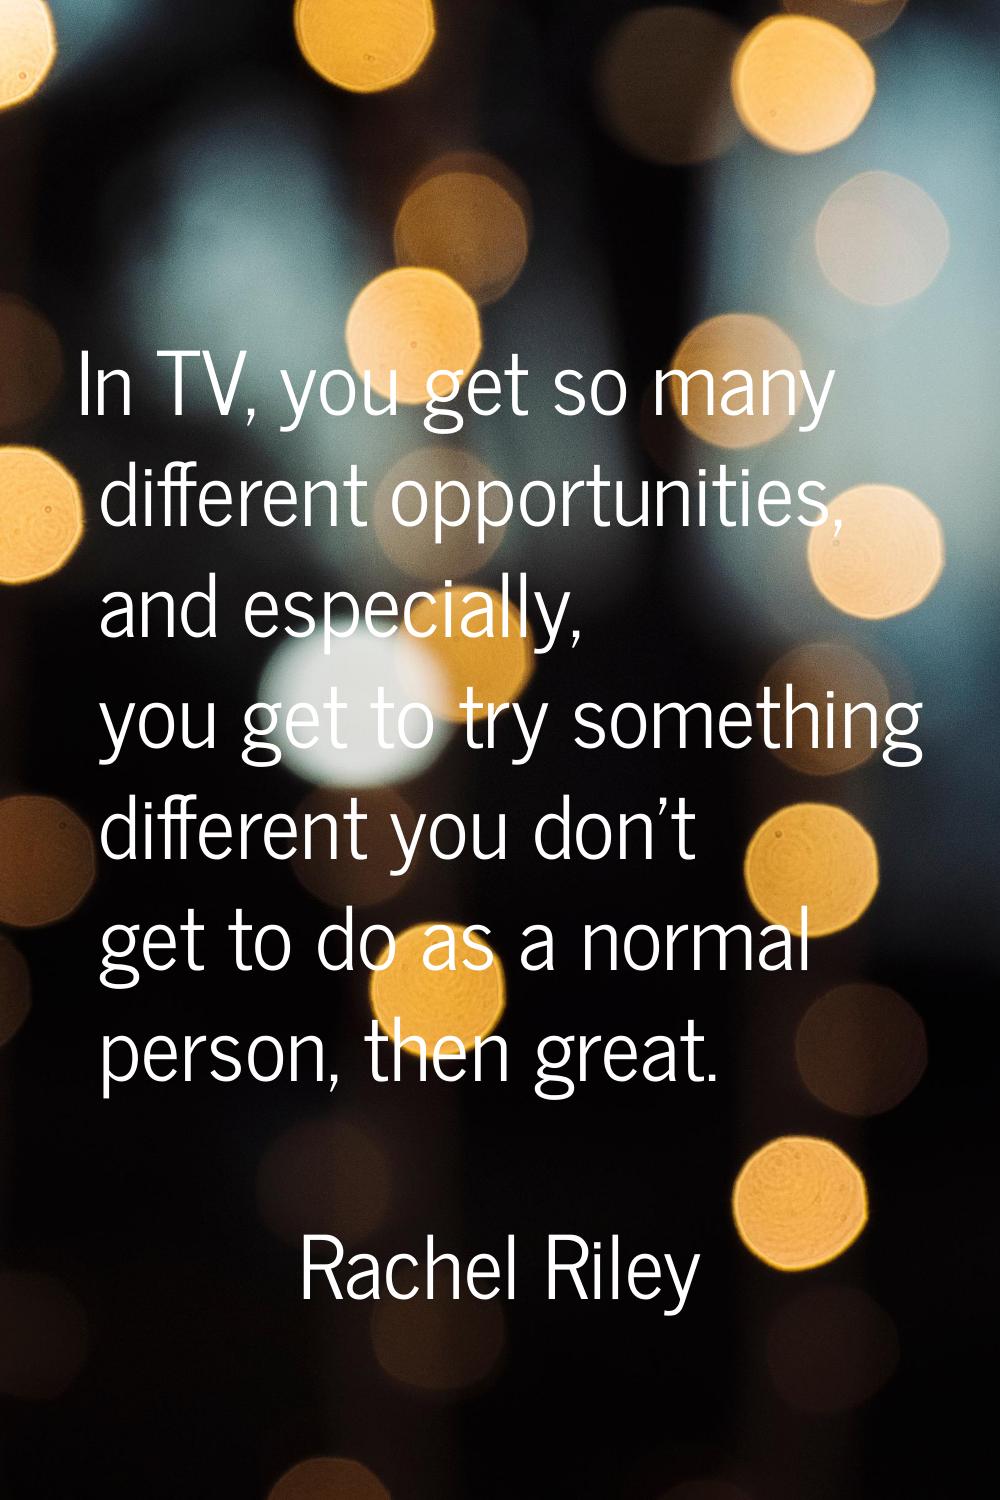 In TV, you get so many different opportunities, and especially, you get to try something different 